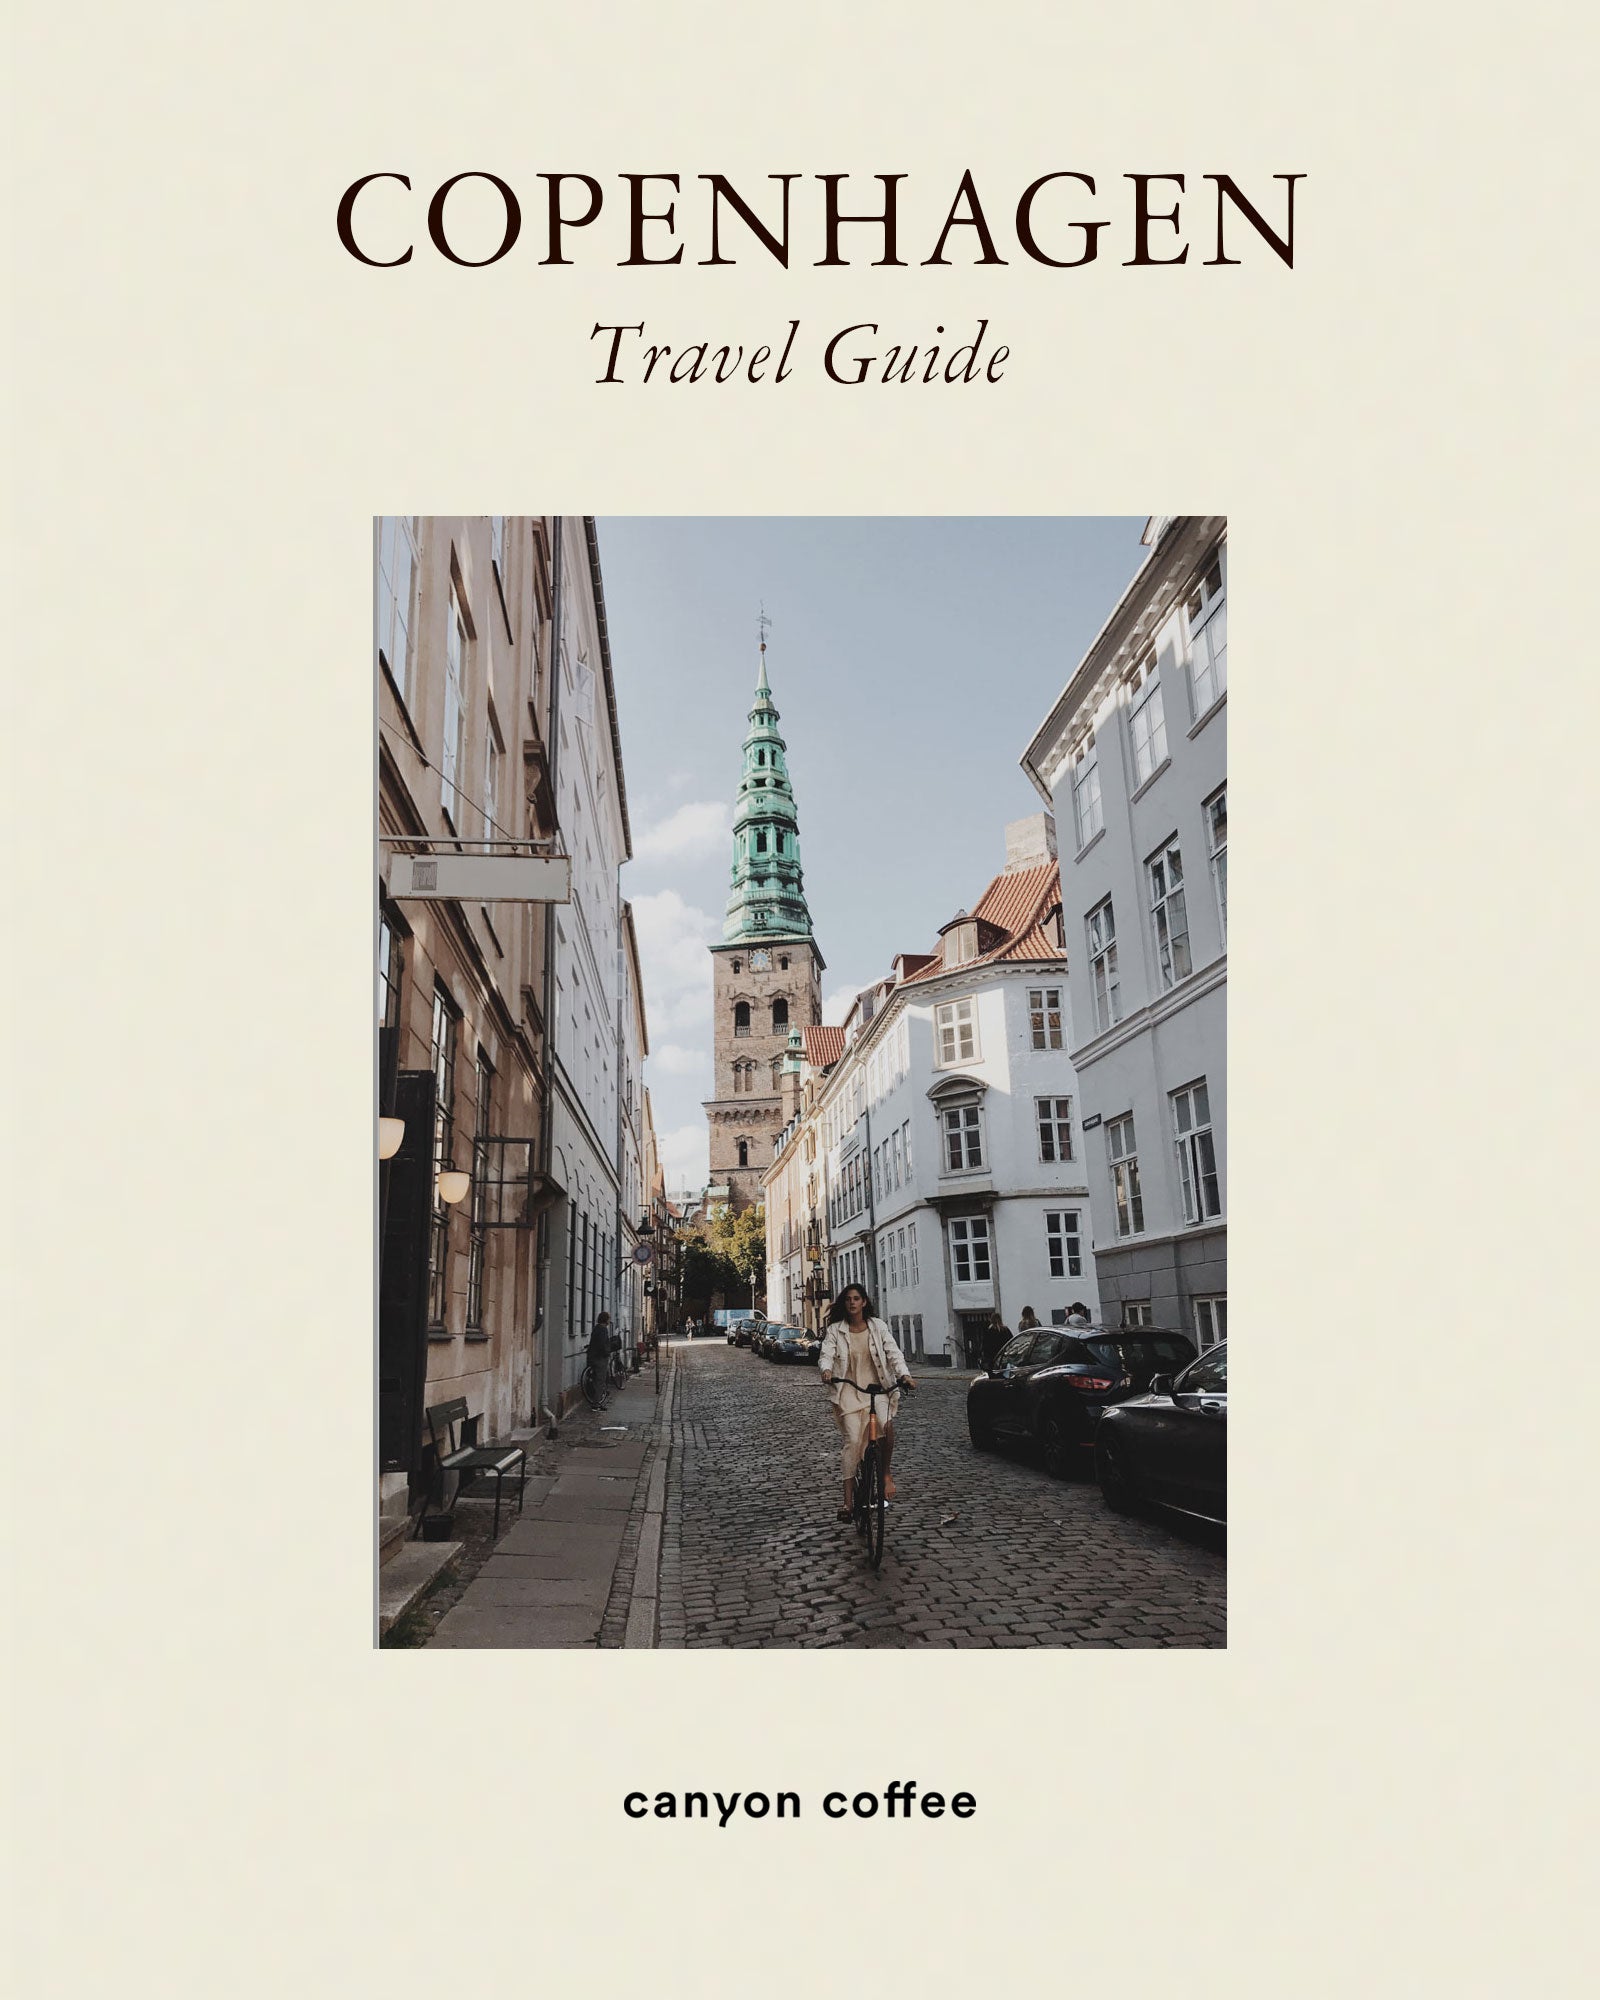 Cover of Canyon Coffee's Copenhagen Coffee guide